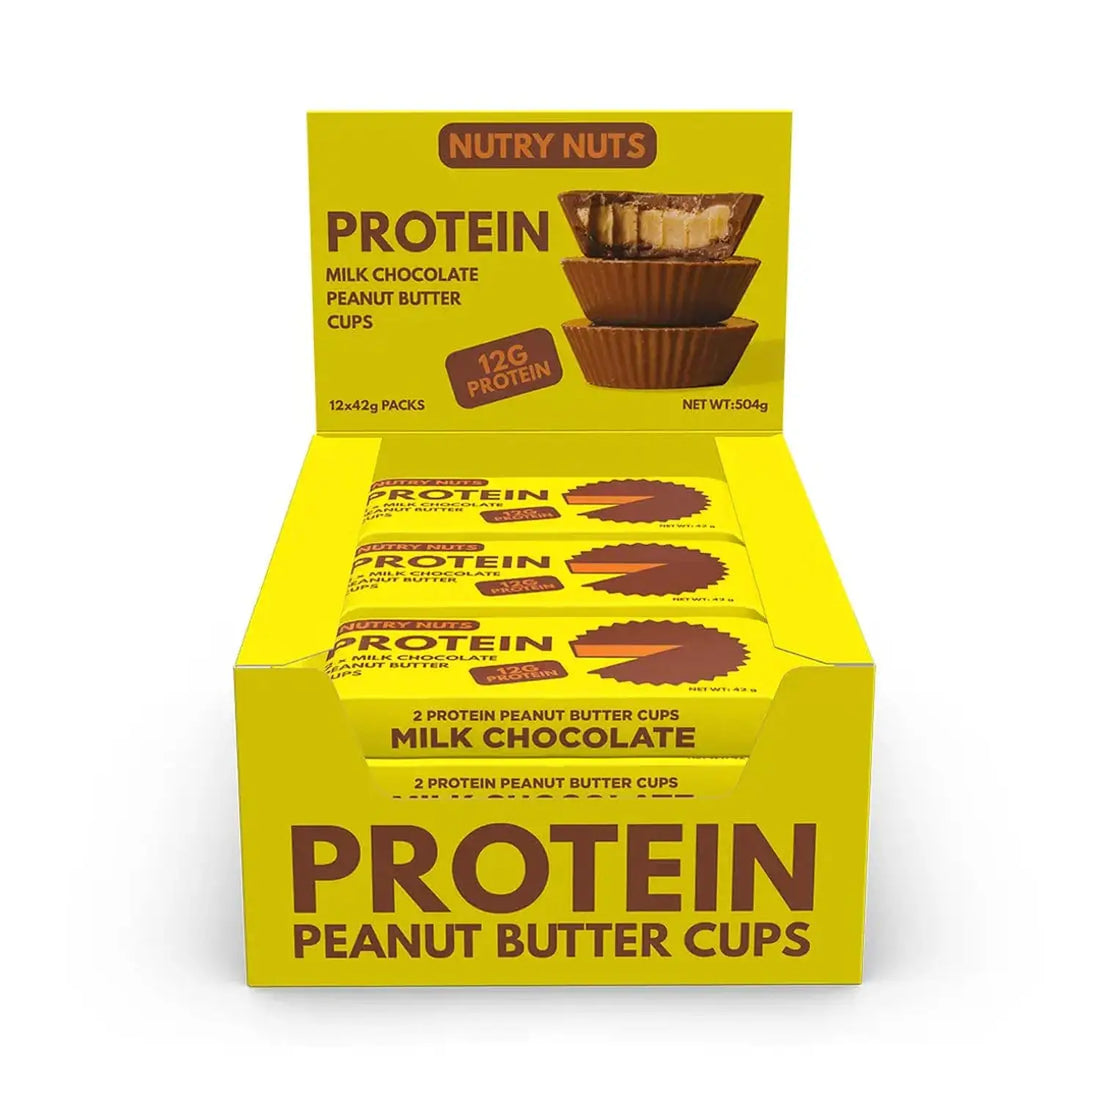 Nutry Nuts Nutry Nuts Peanut Butter Cups 12 x 42 g Milk Chocolate kaufen bei HighPowered.ch